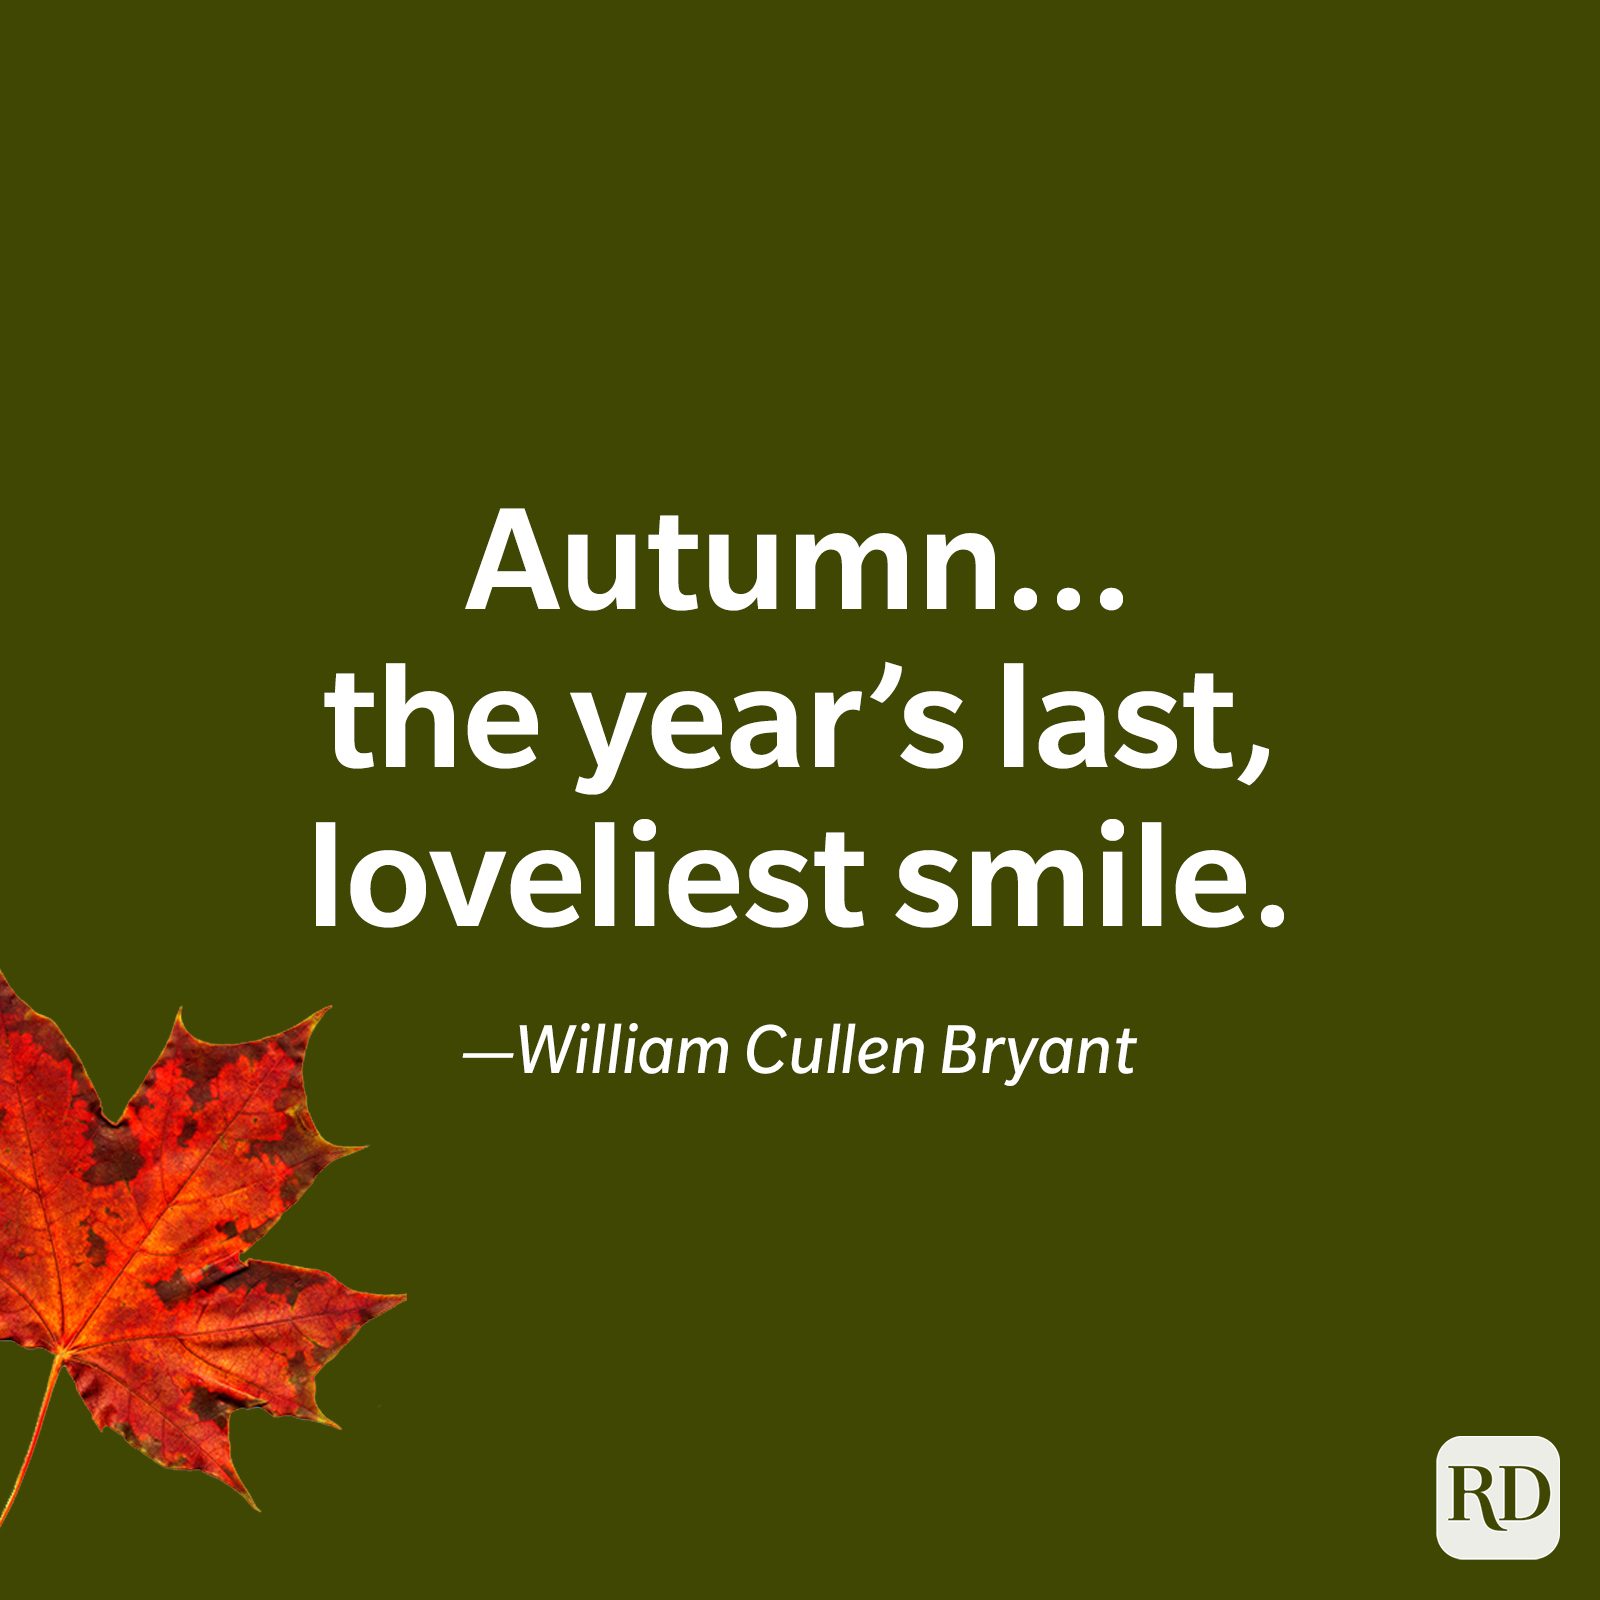 50 Best Fall Quotes You'll Absolutely Love [2021]